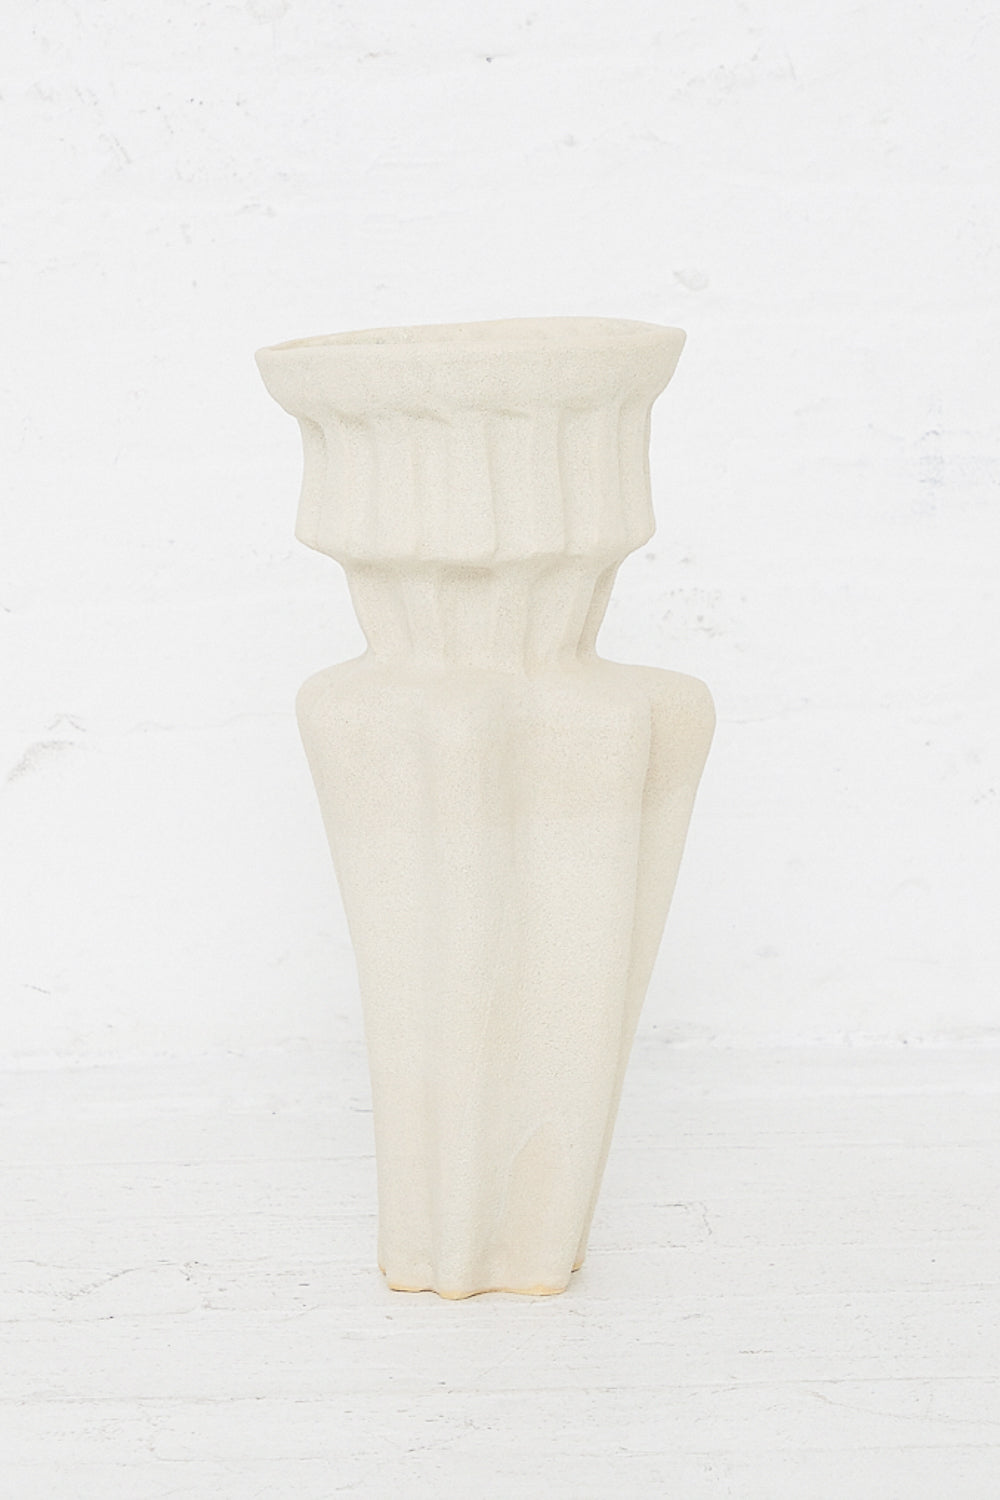 A Column Vessel in White by ANK Ceramics, a hand-built stoneware vessel with a white glaze, sitting on a white table.